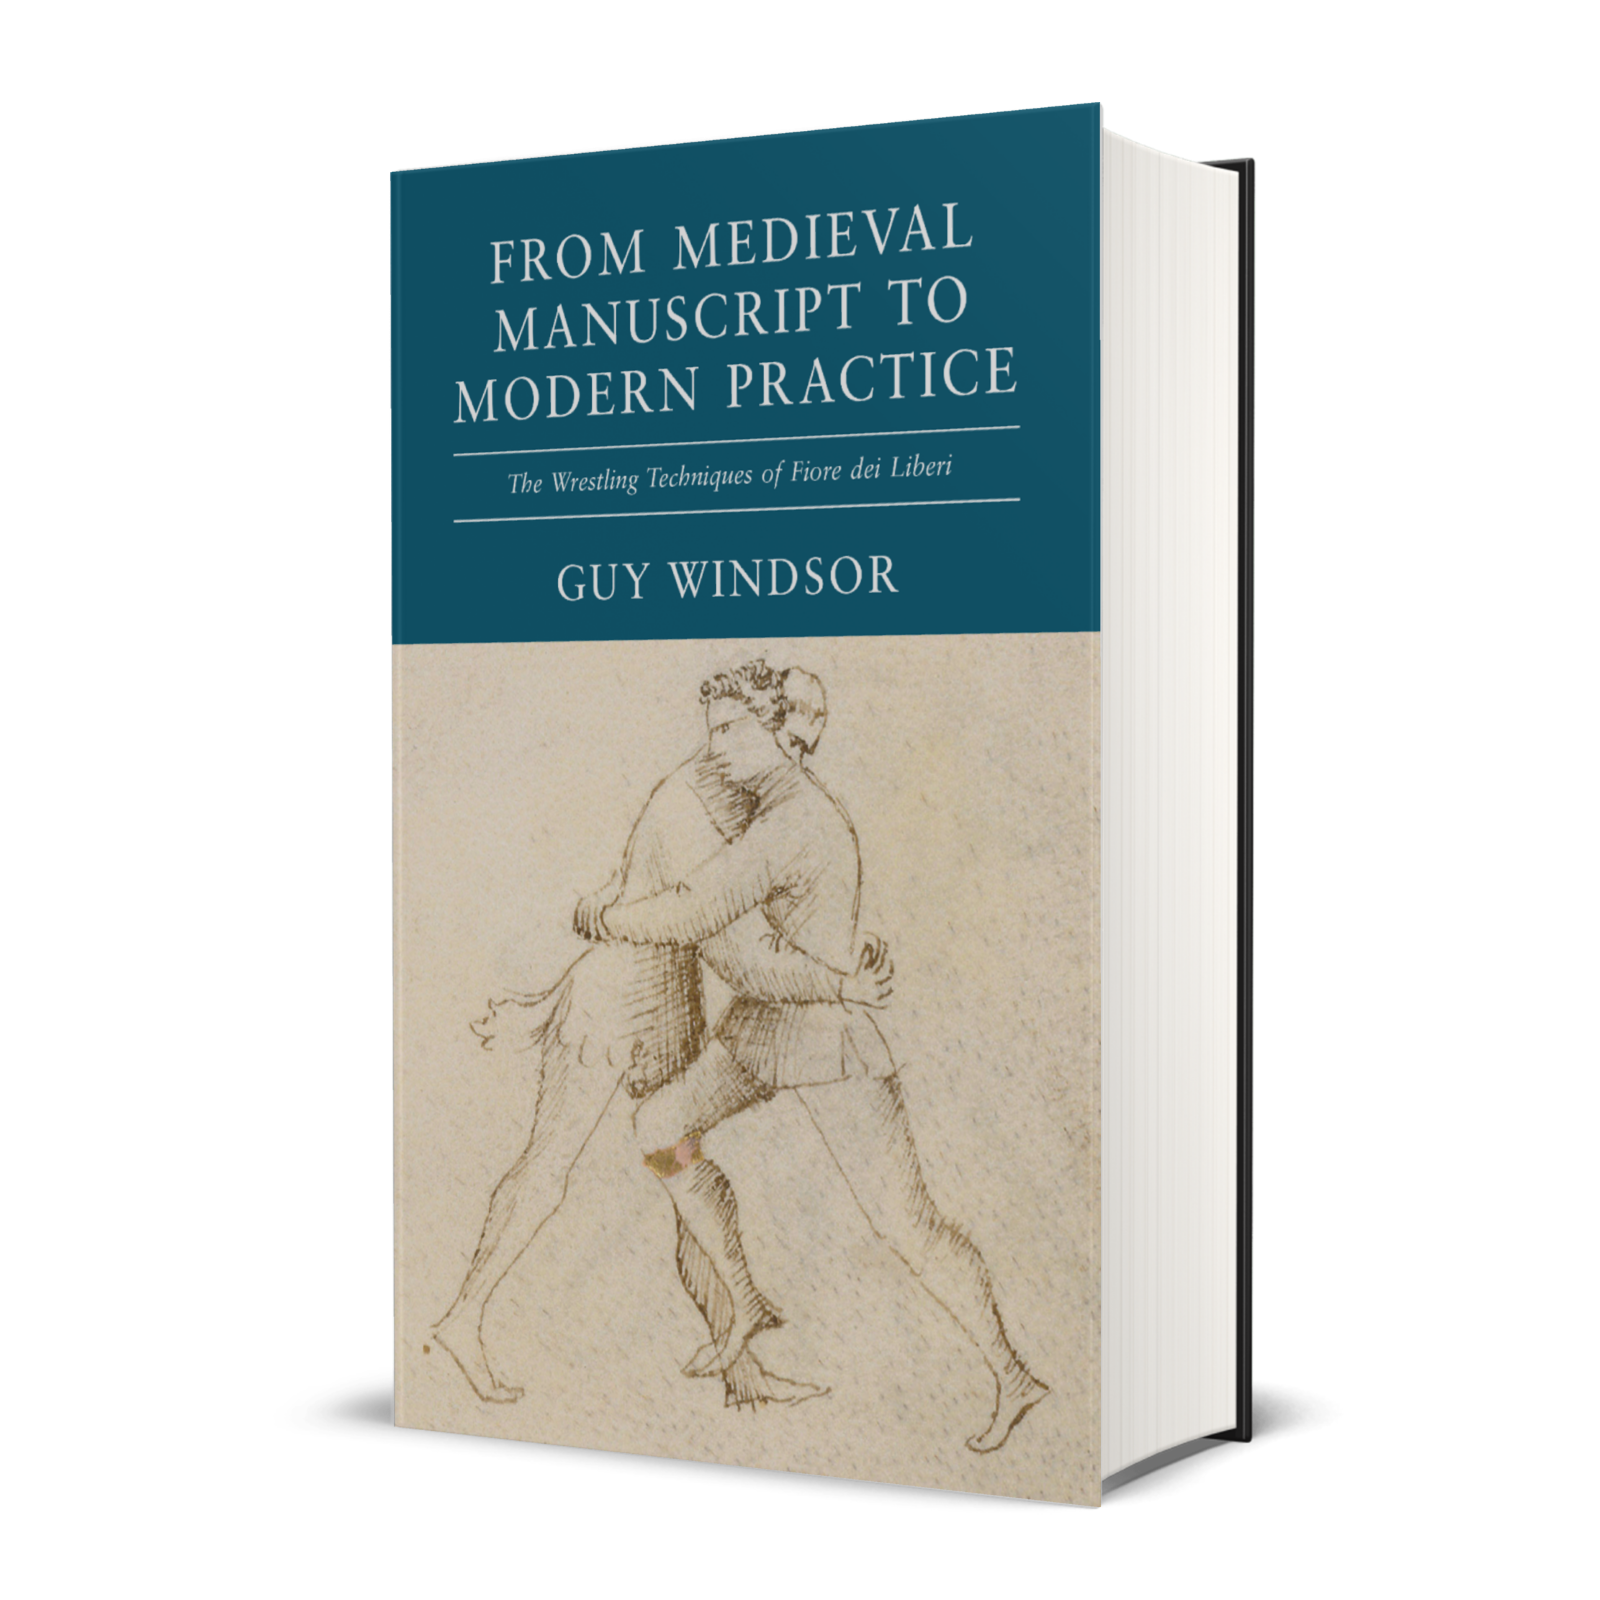 From Medieval Manuscript to Modern Practice: The Wrestling Techniques of Fiore dei Liberi (Hardback) by Guy Windsor